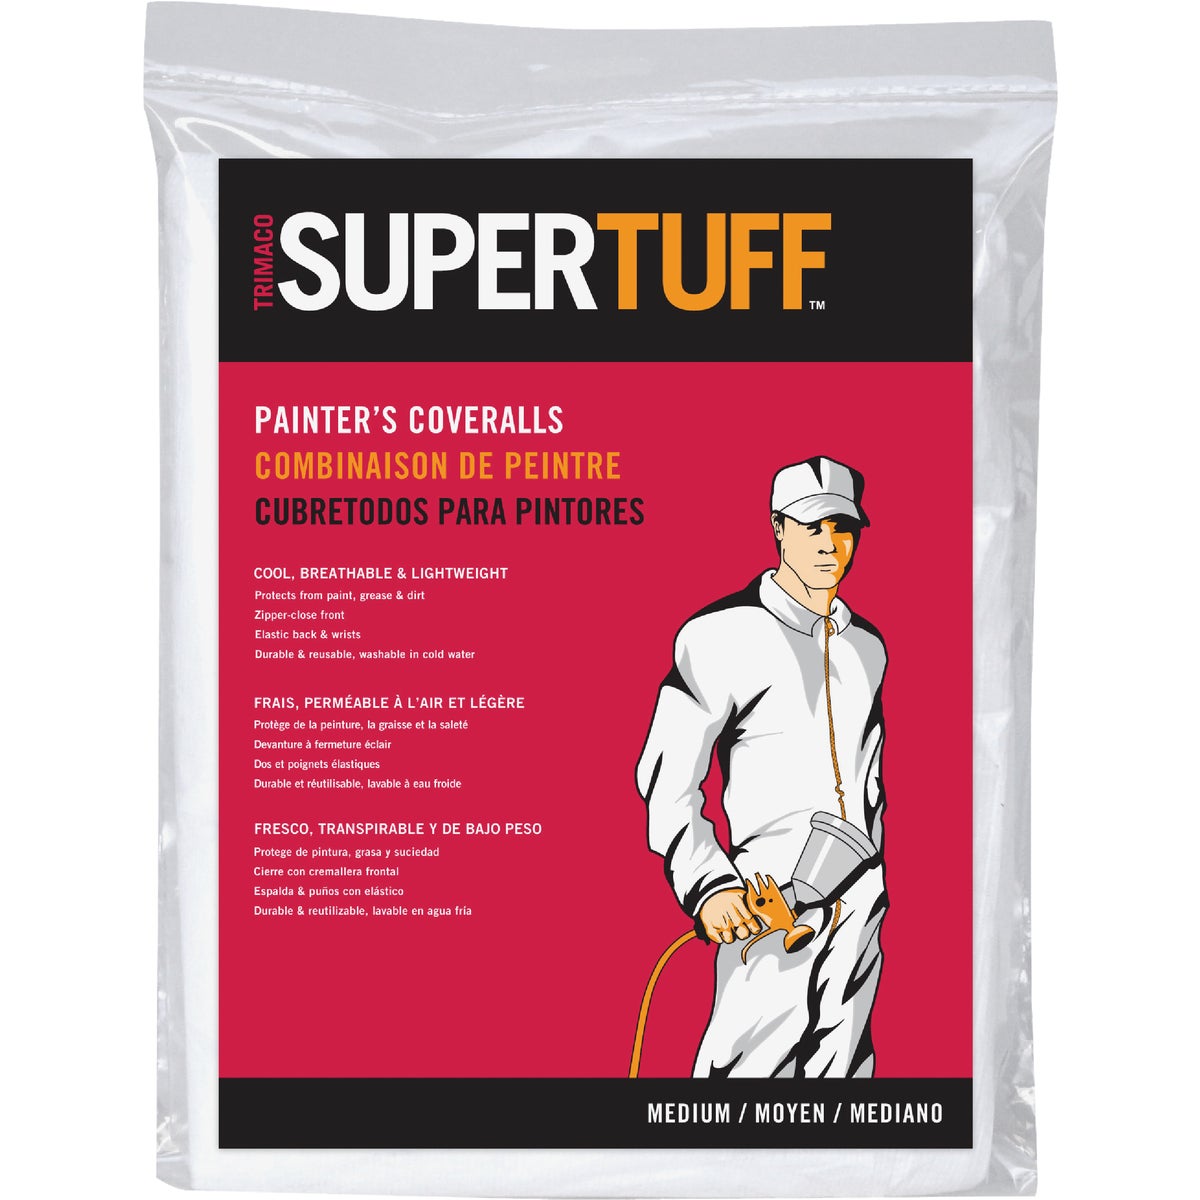 Item 771120, Trimaco's SuperTuff Polypropylene Disposable Coveralls are made from a 